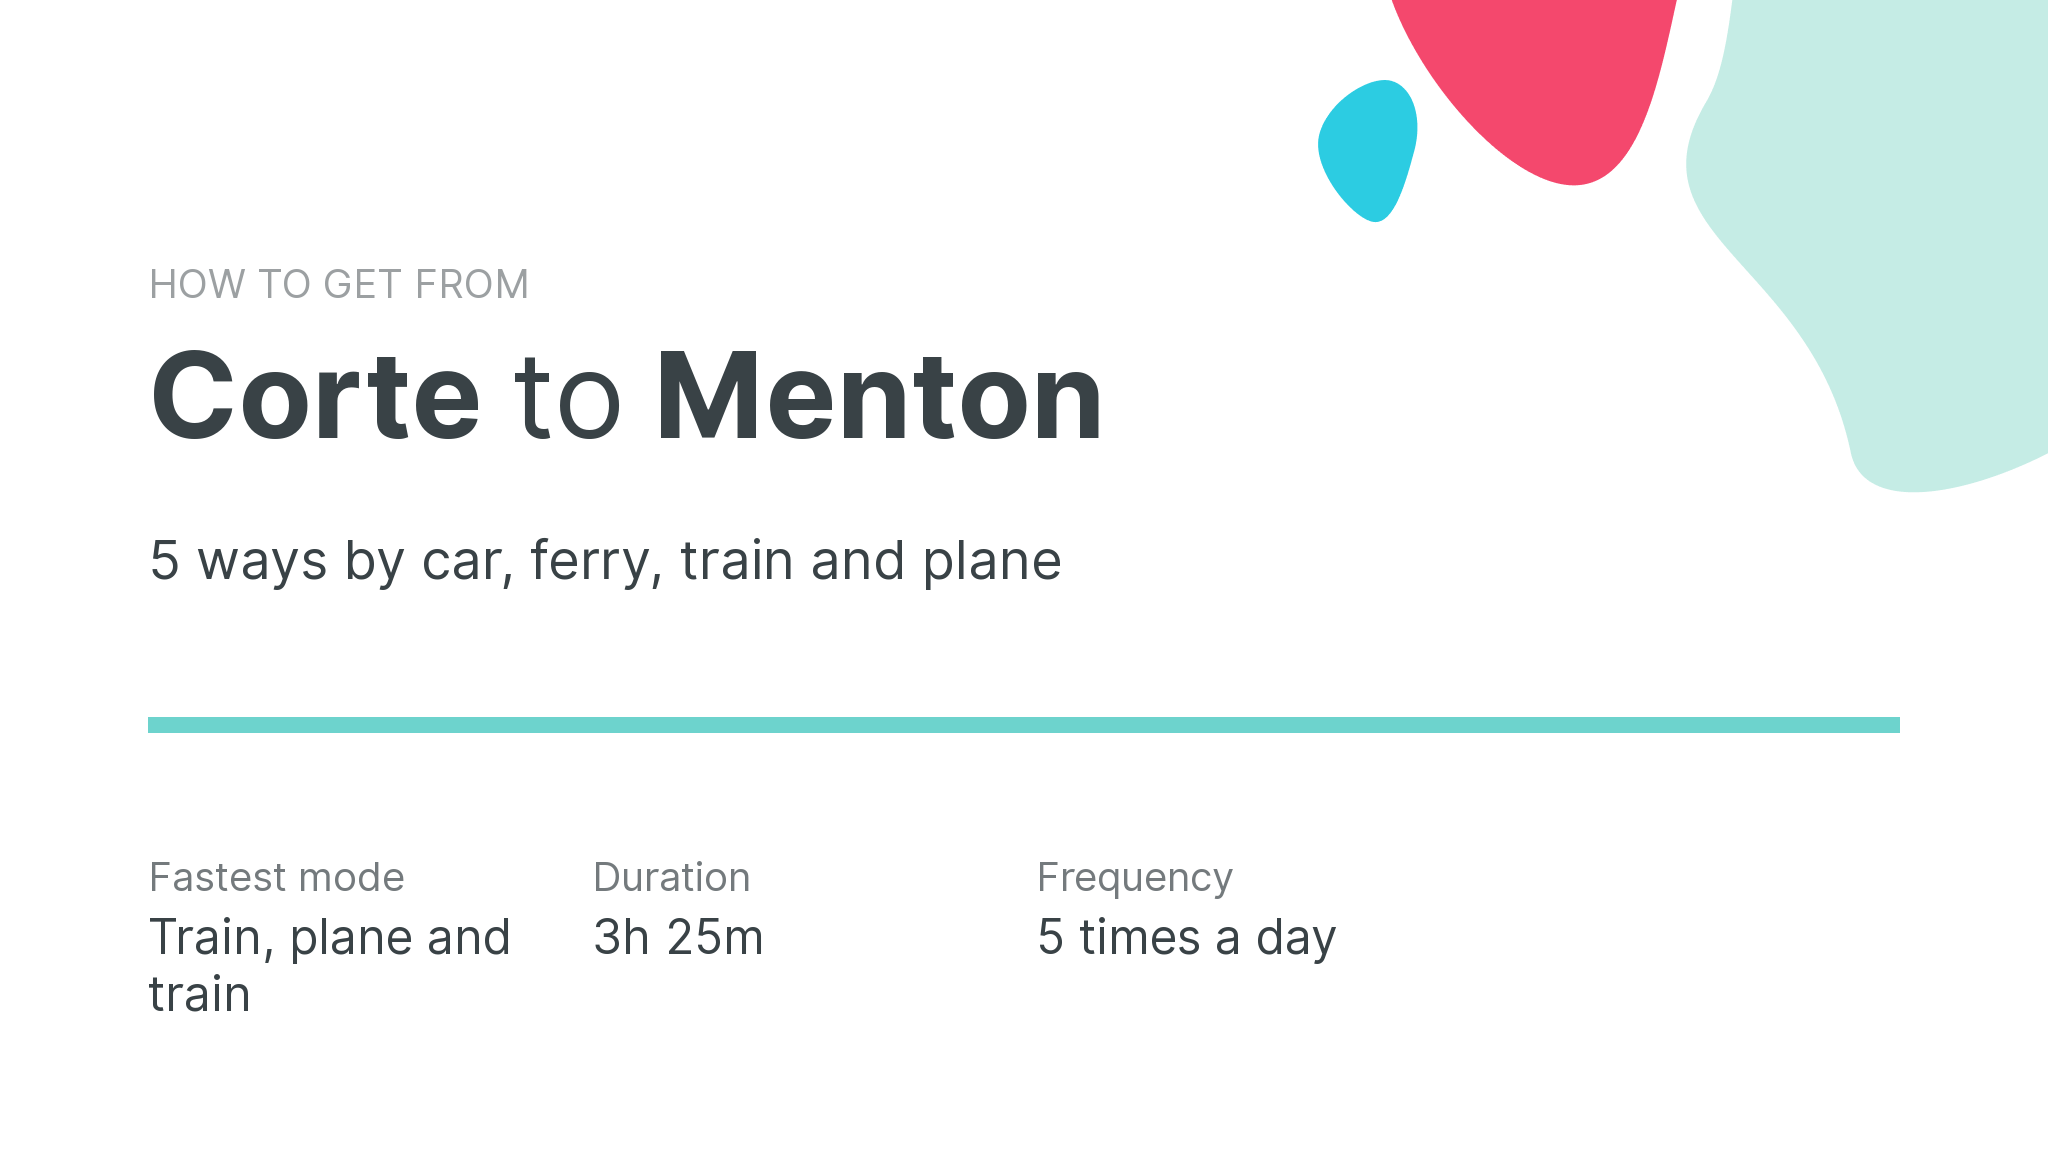 How do I get from Corte to Menton